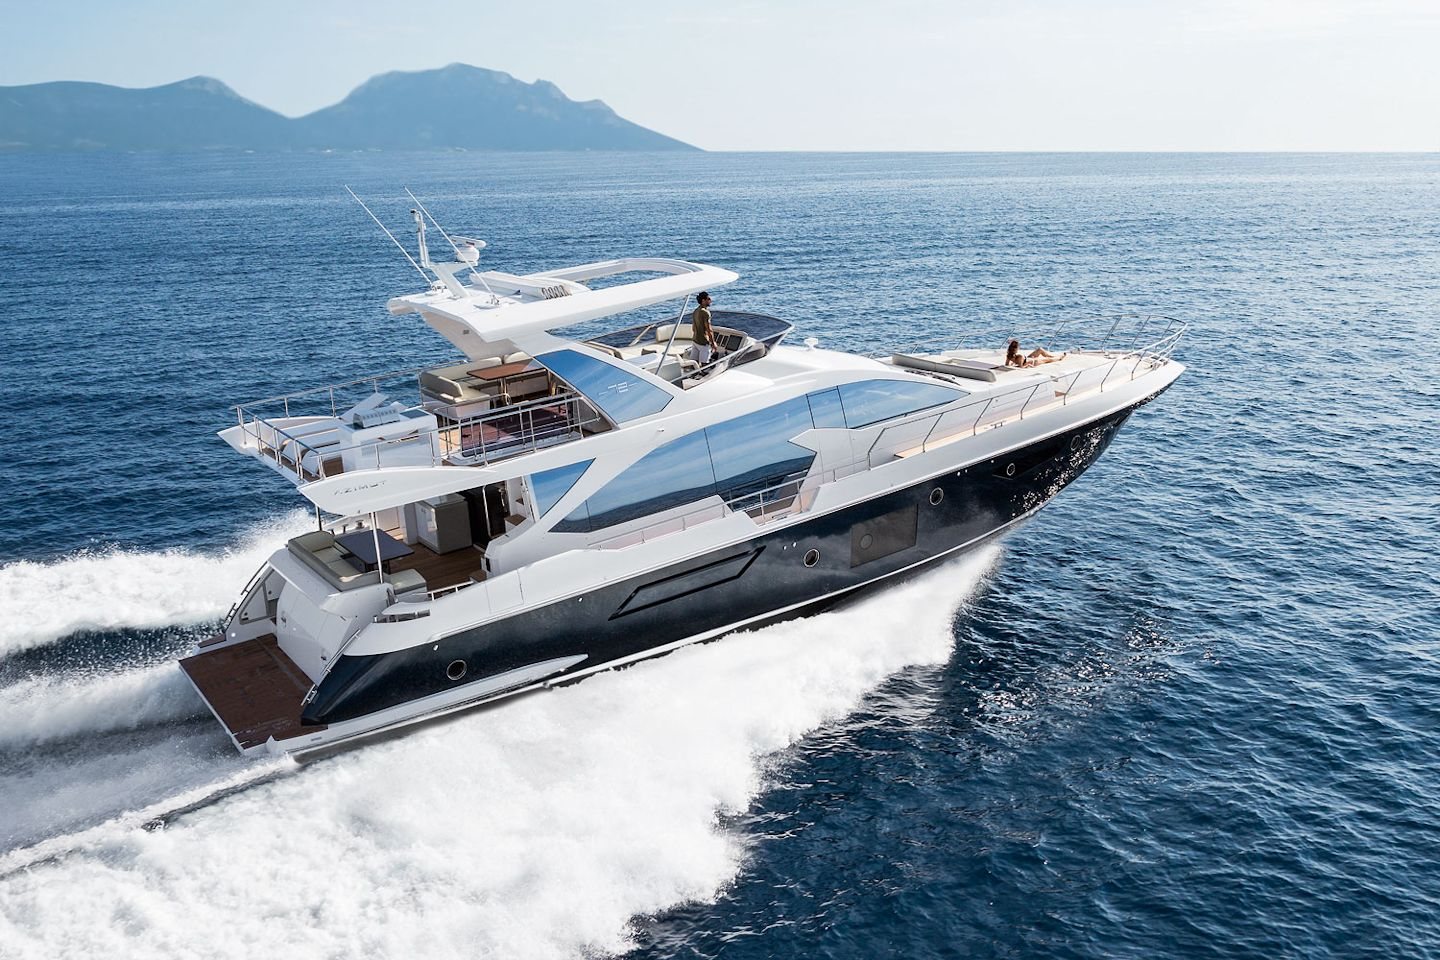 360 VR Virtual Tours of the Azimut Fly 72